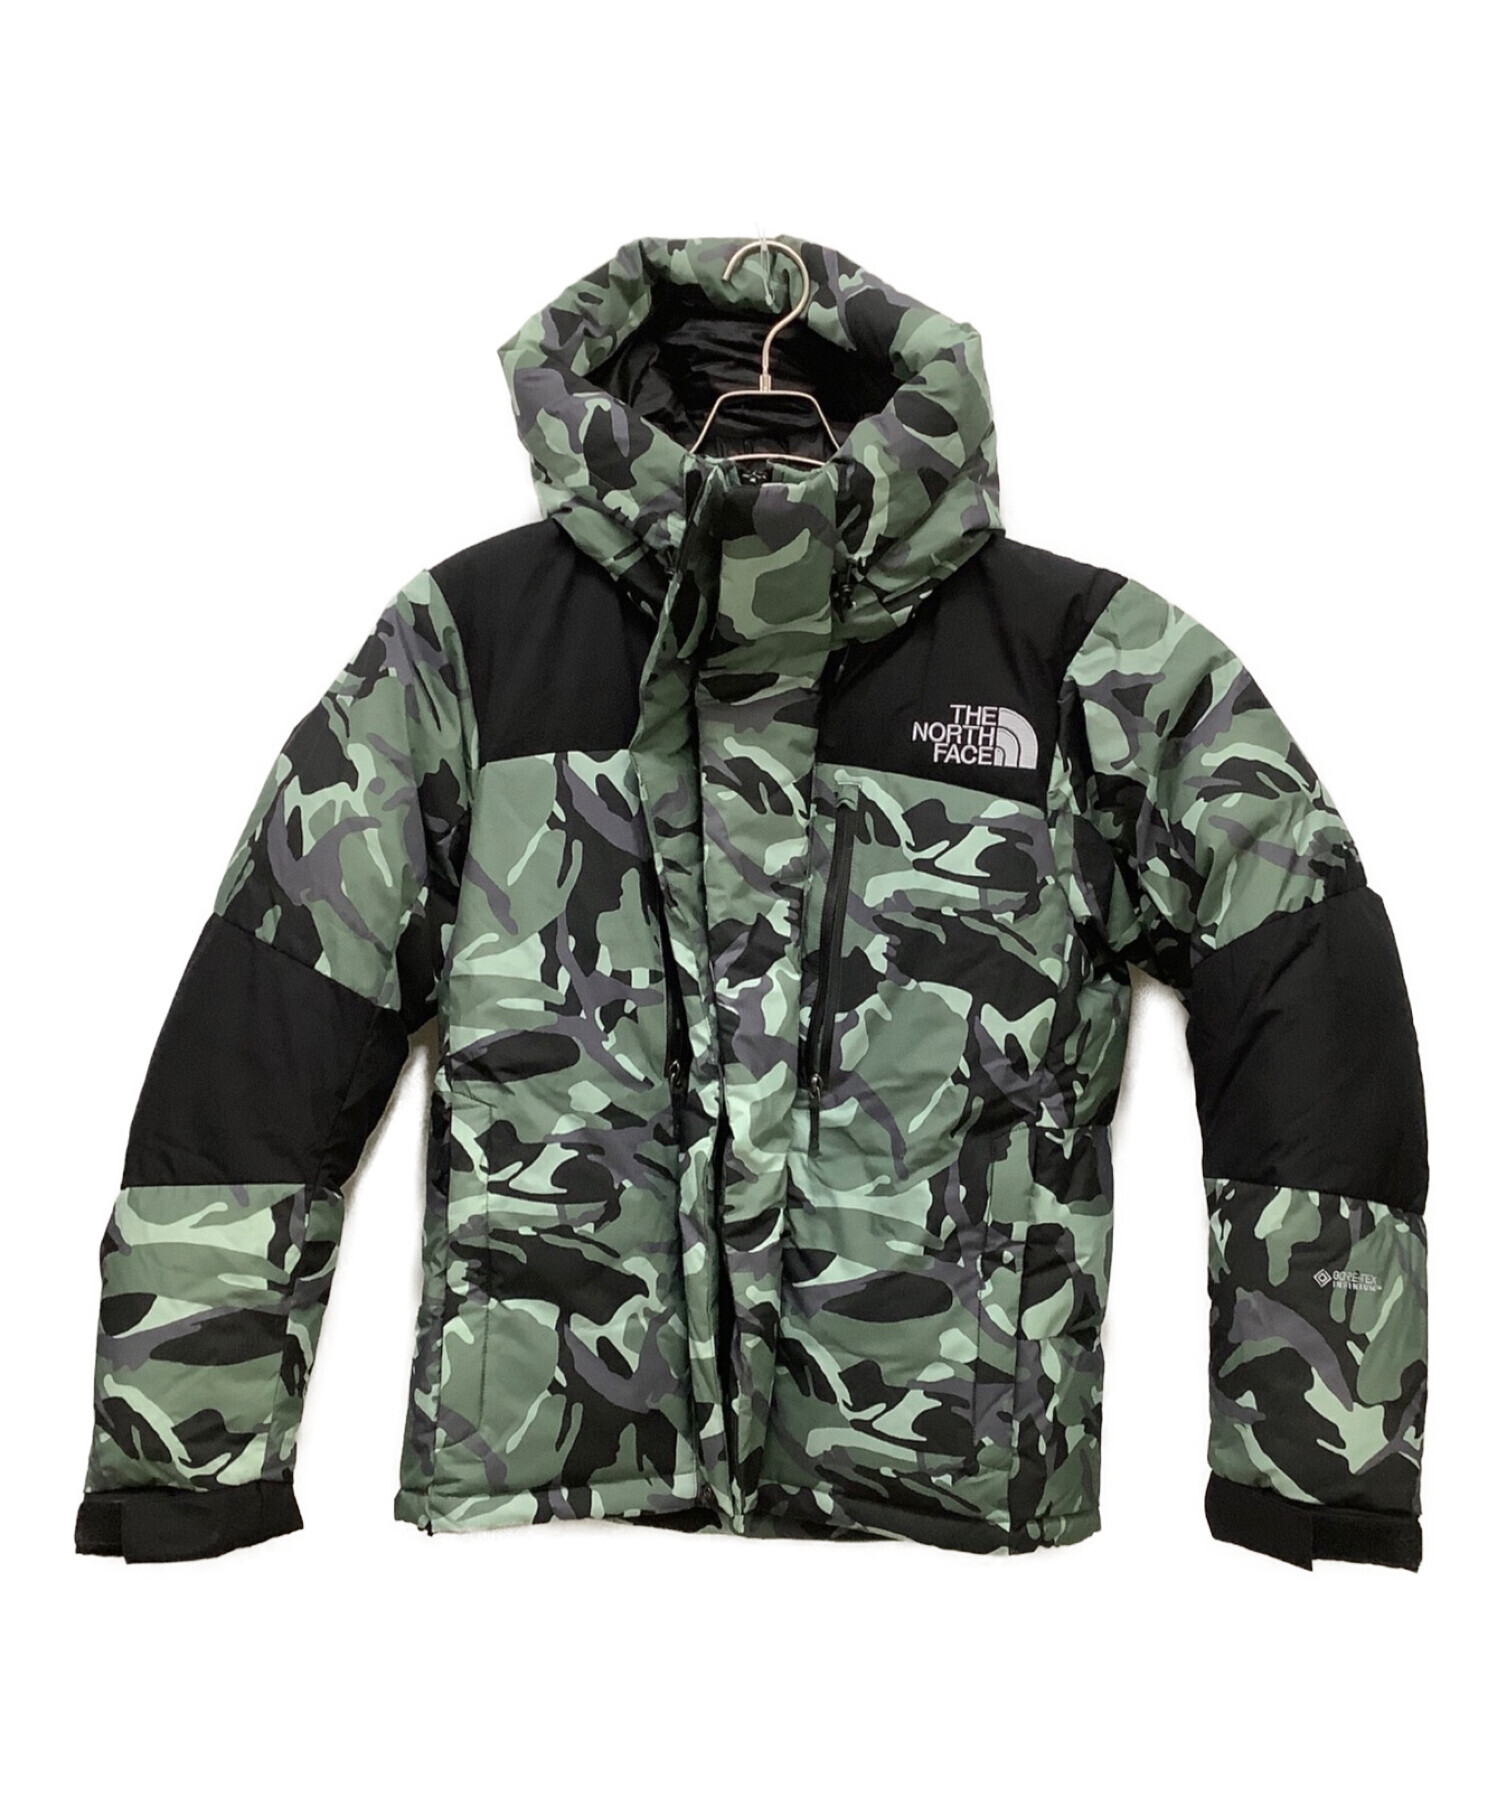 THE NORTH FACE バルトロライトジャケット ND91515